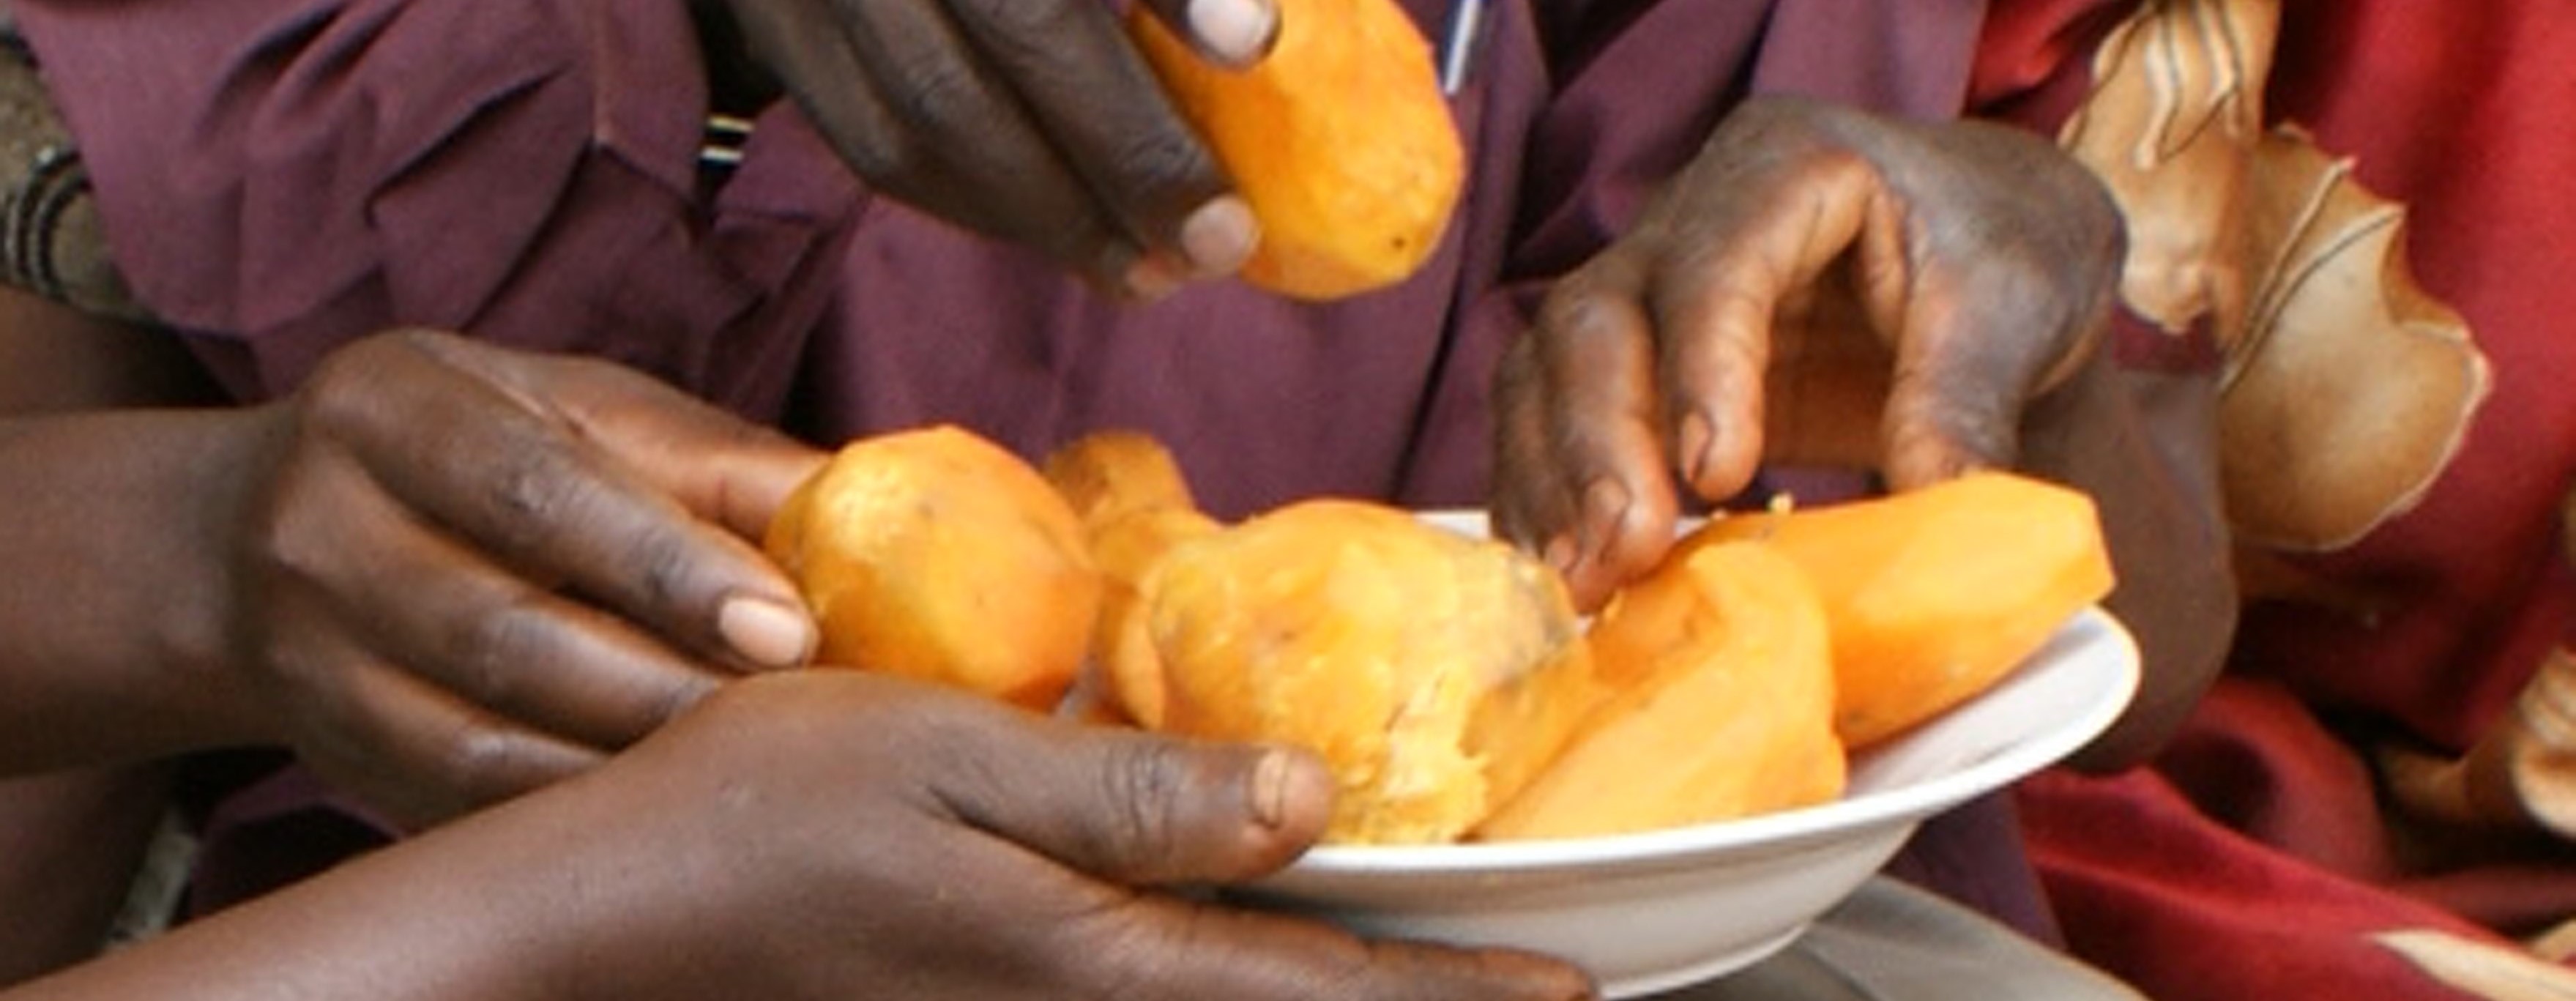 HarvestPlus, FAO Release Joint Brief on Biofortification